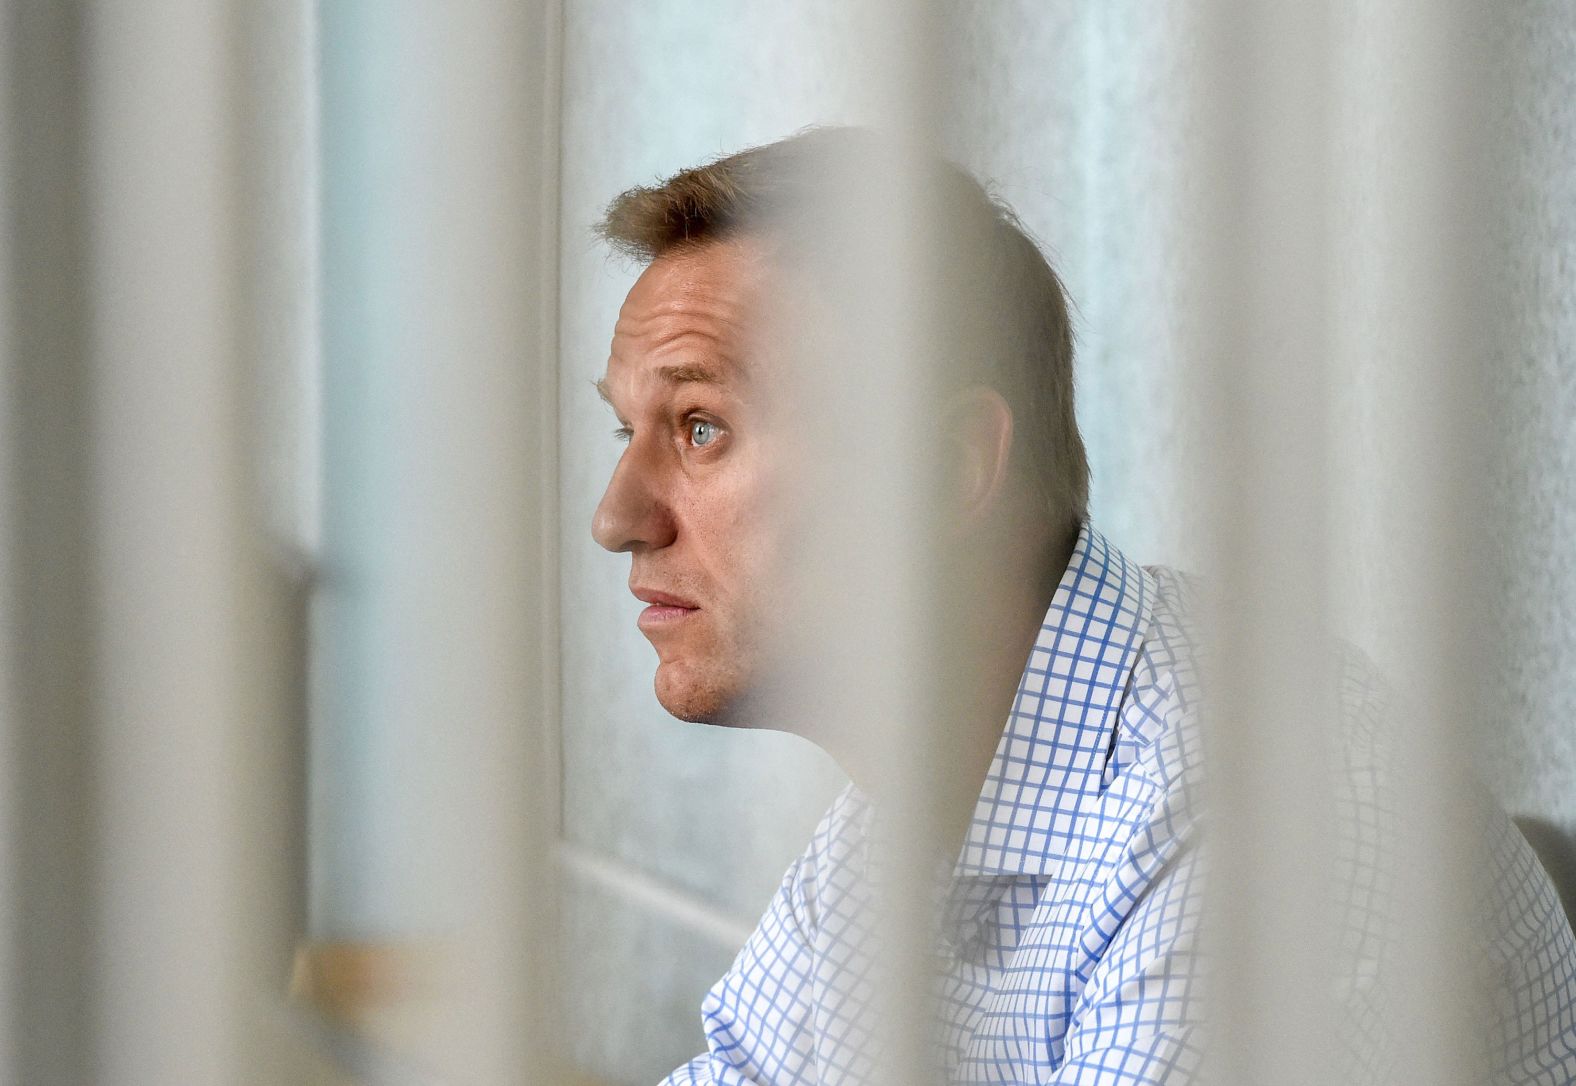 Navalny attends a hearing at a court in Moscow in June 2019. Navalny was appearing in court after taking part in an unauthorized protest.